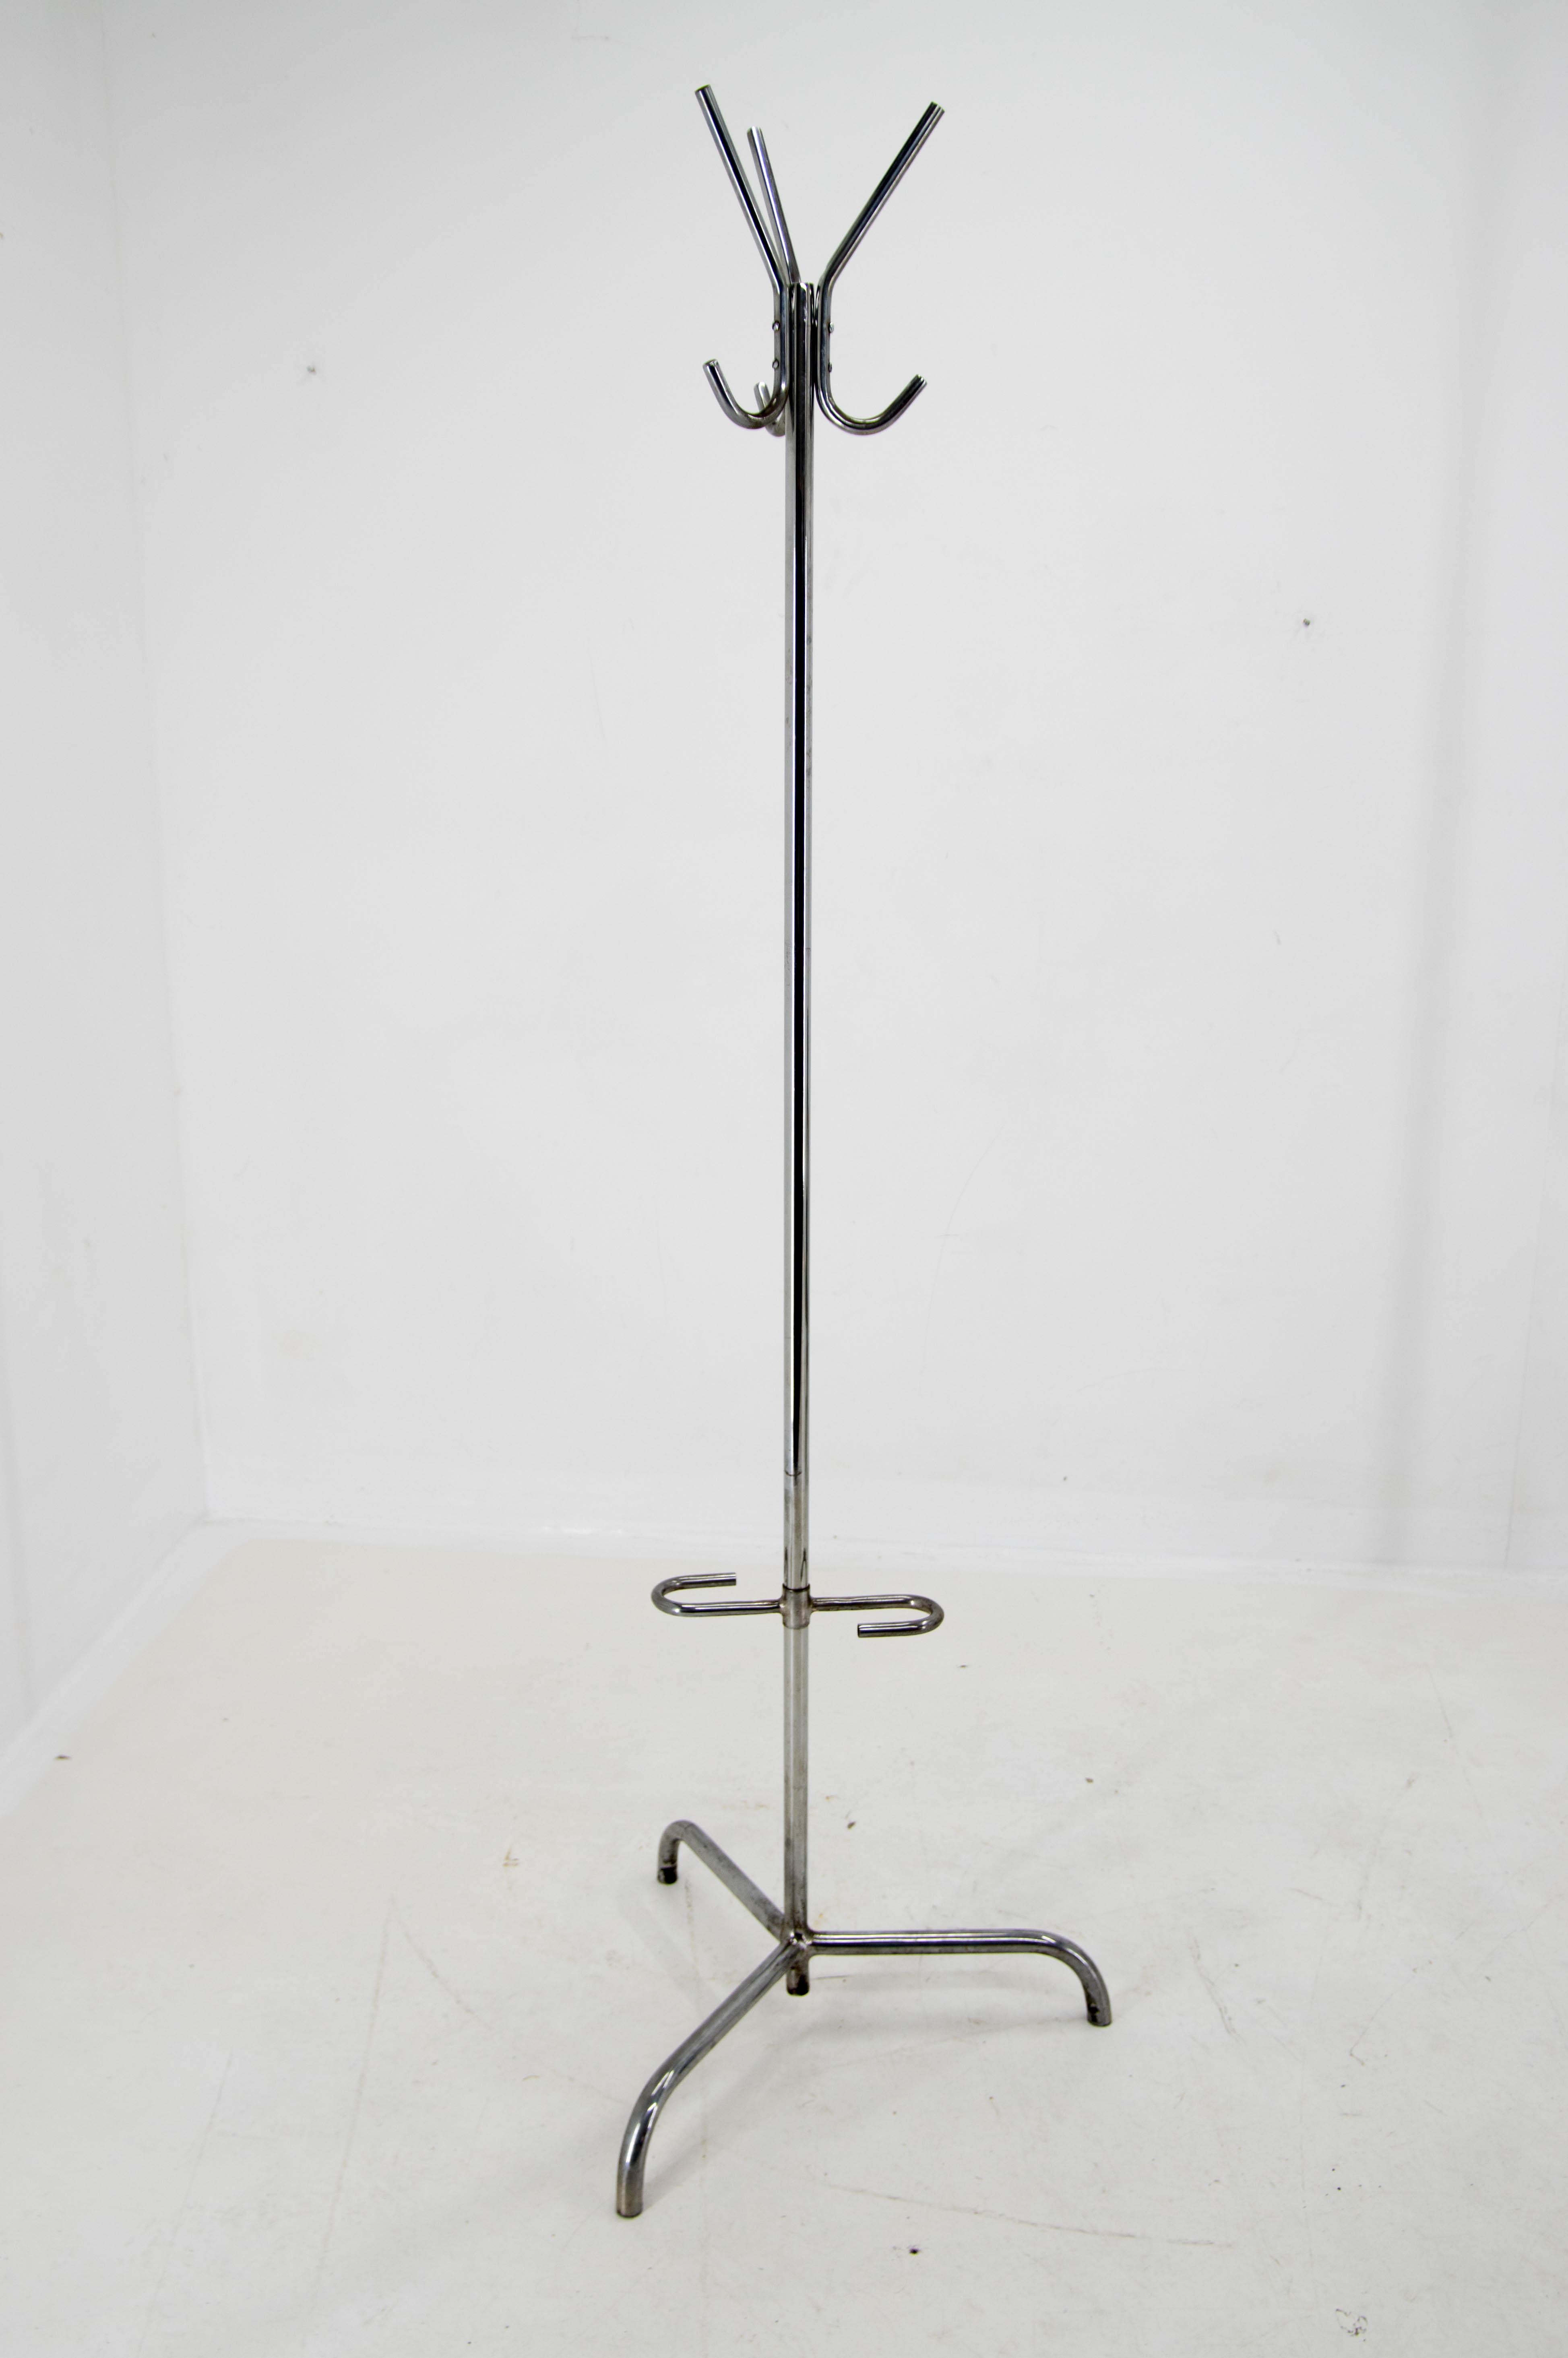 Industrial coat rack from Bauhaus factory built in 1920s.
Original condition with losses on chrome.
Cleaned, polished.